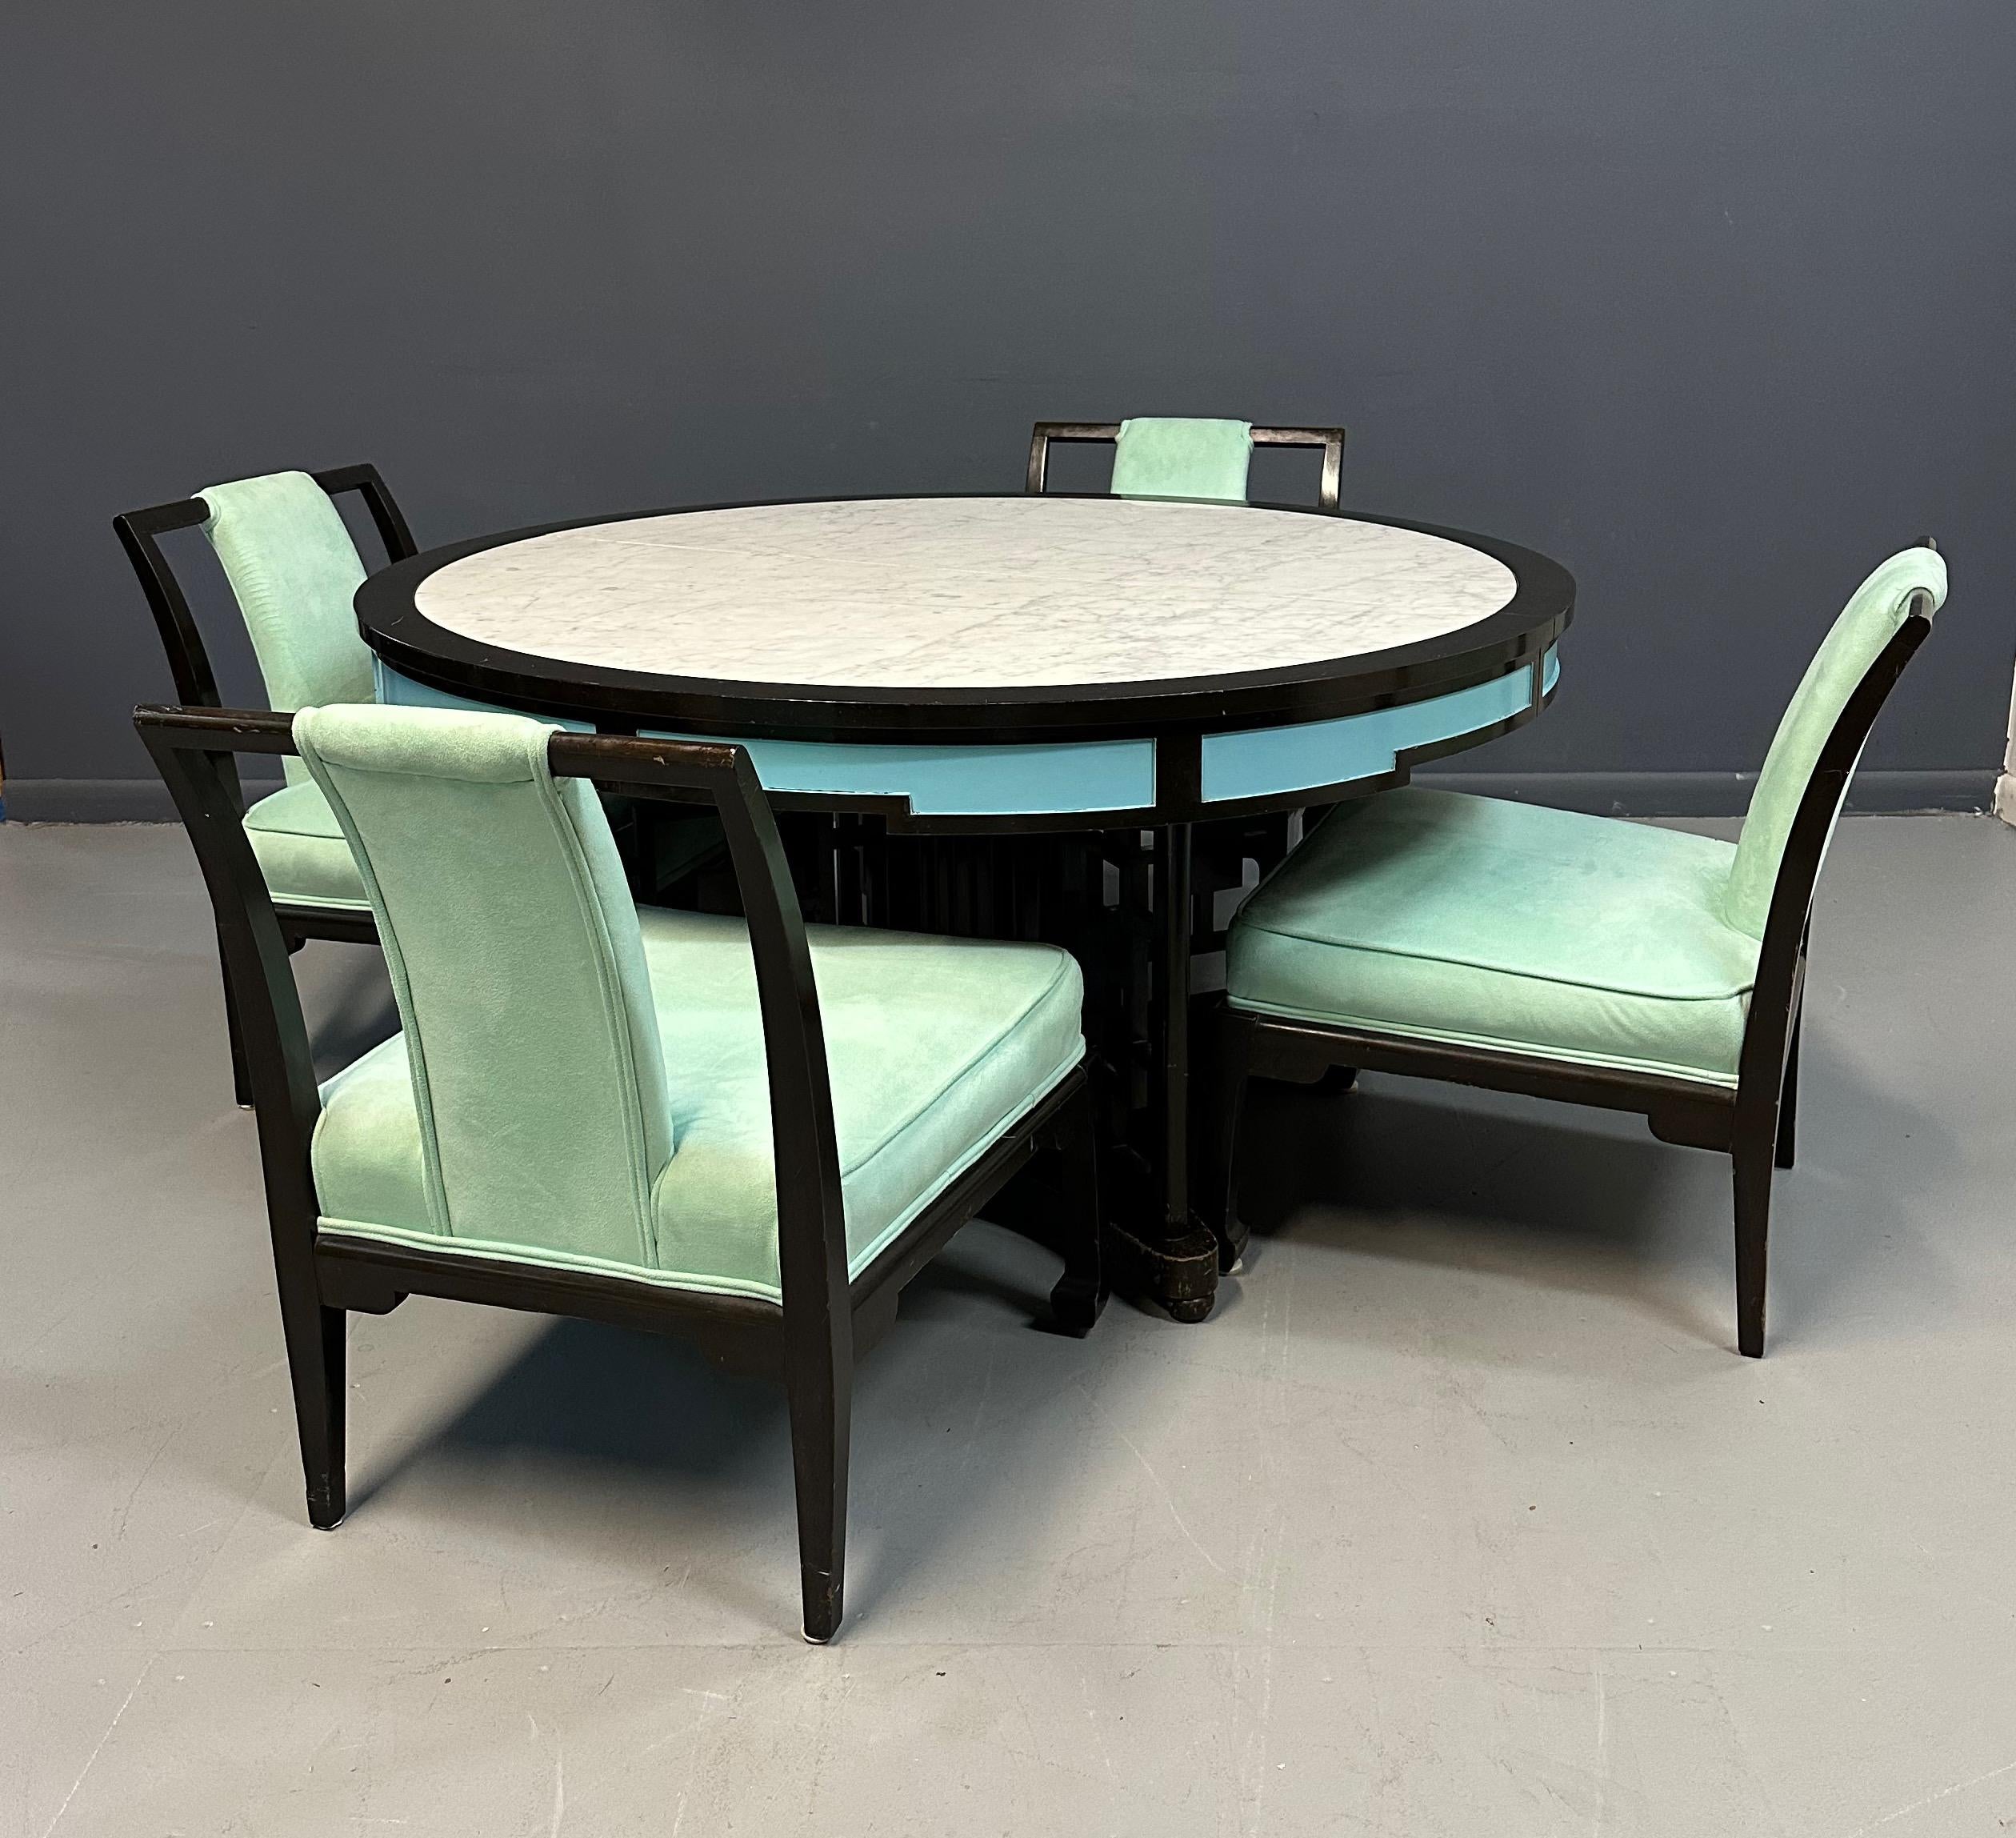 Unusual chinoiserie marble topped dining table and four velvet upholstered chairs. The table has a marble inlay and two leaves. The chairs have been upholstered in a lovely sea foam green and the side panels on the table have been painted that